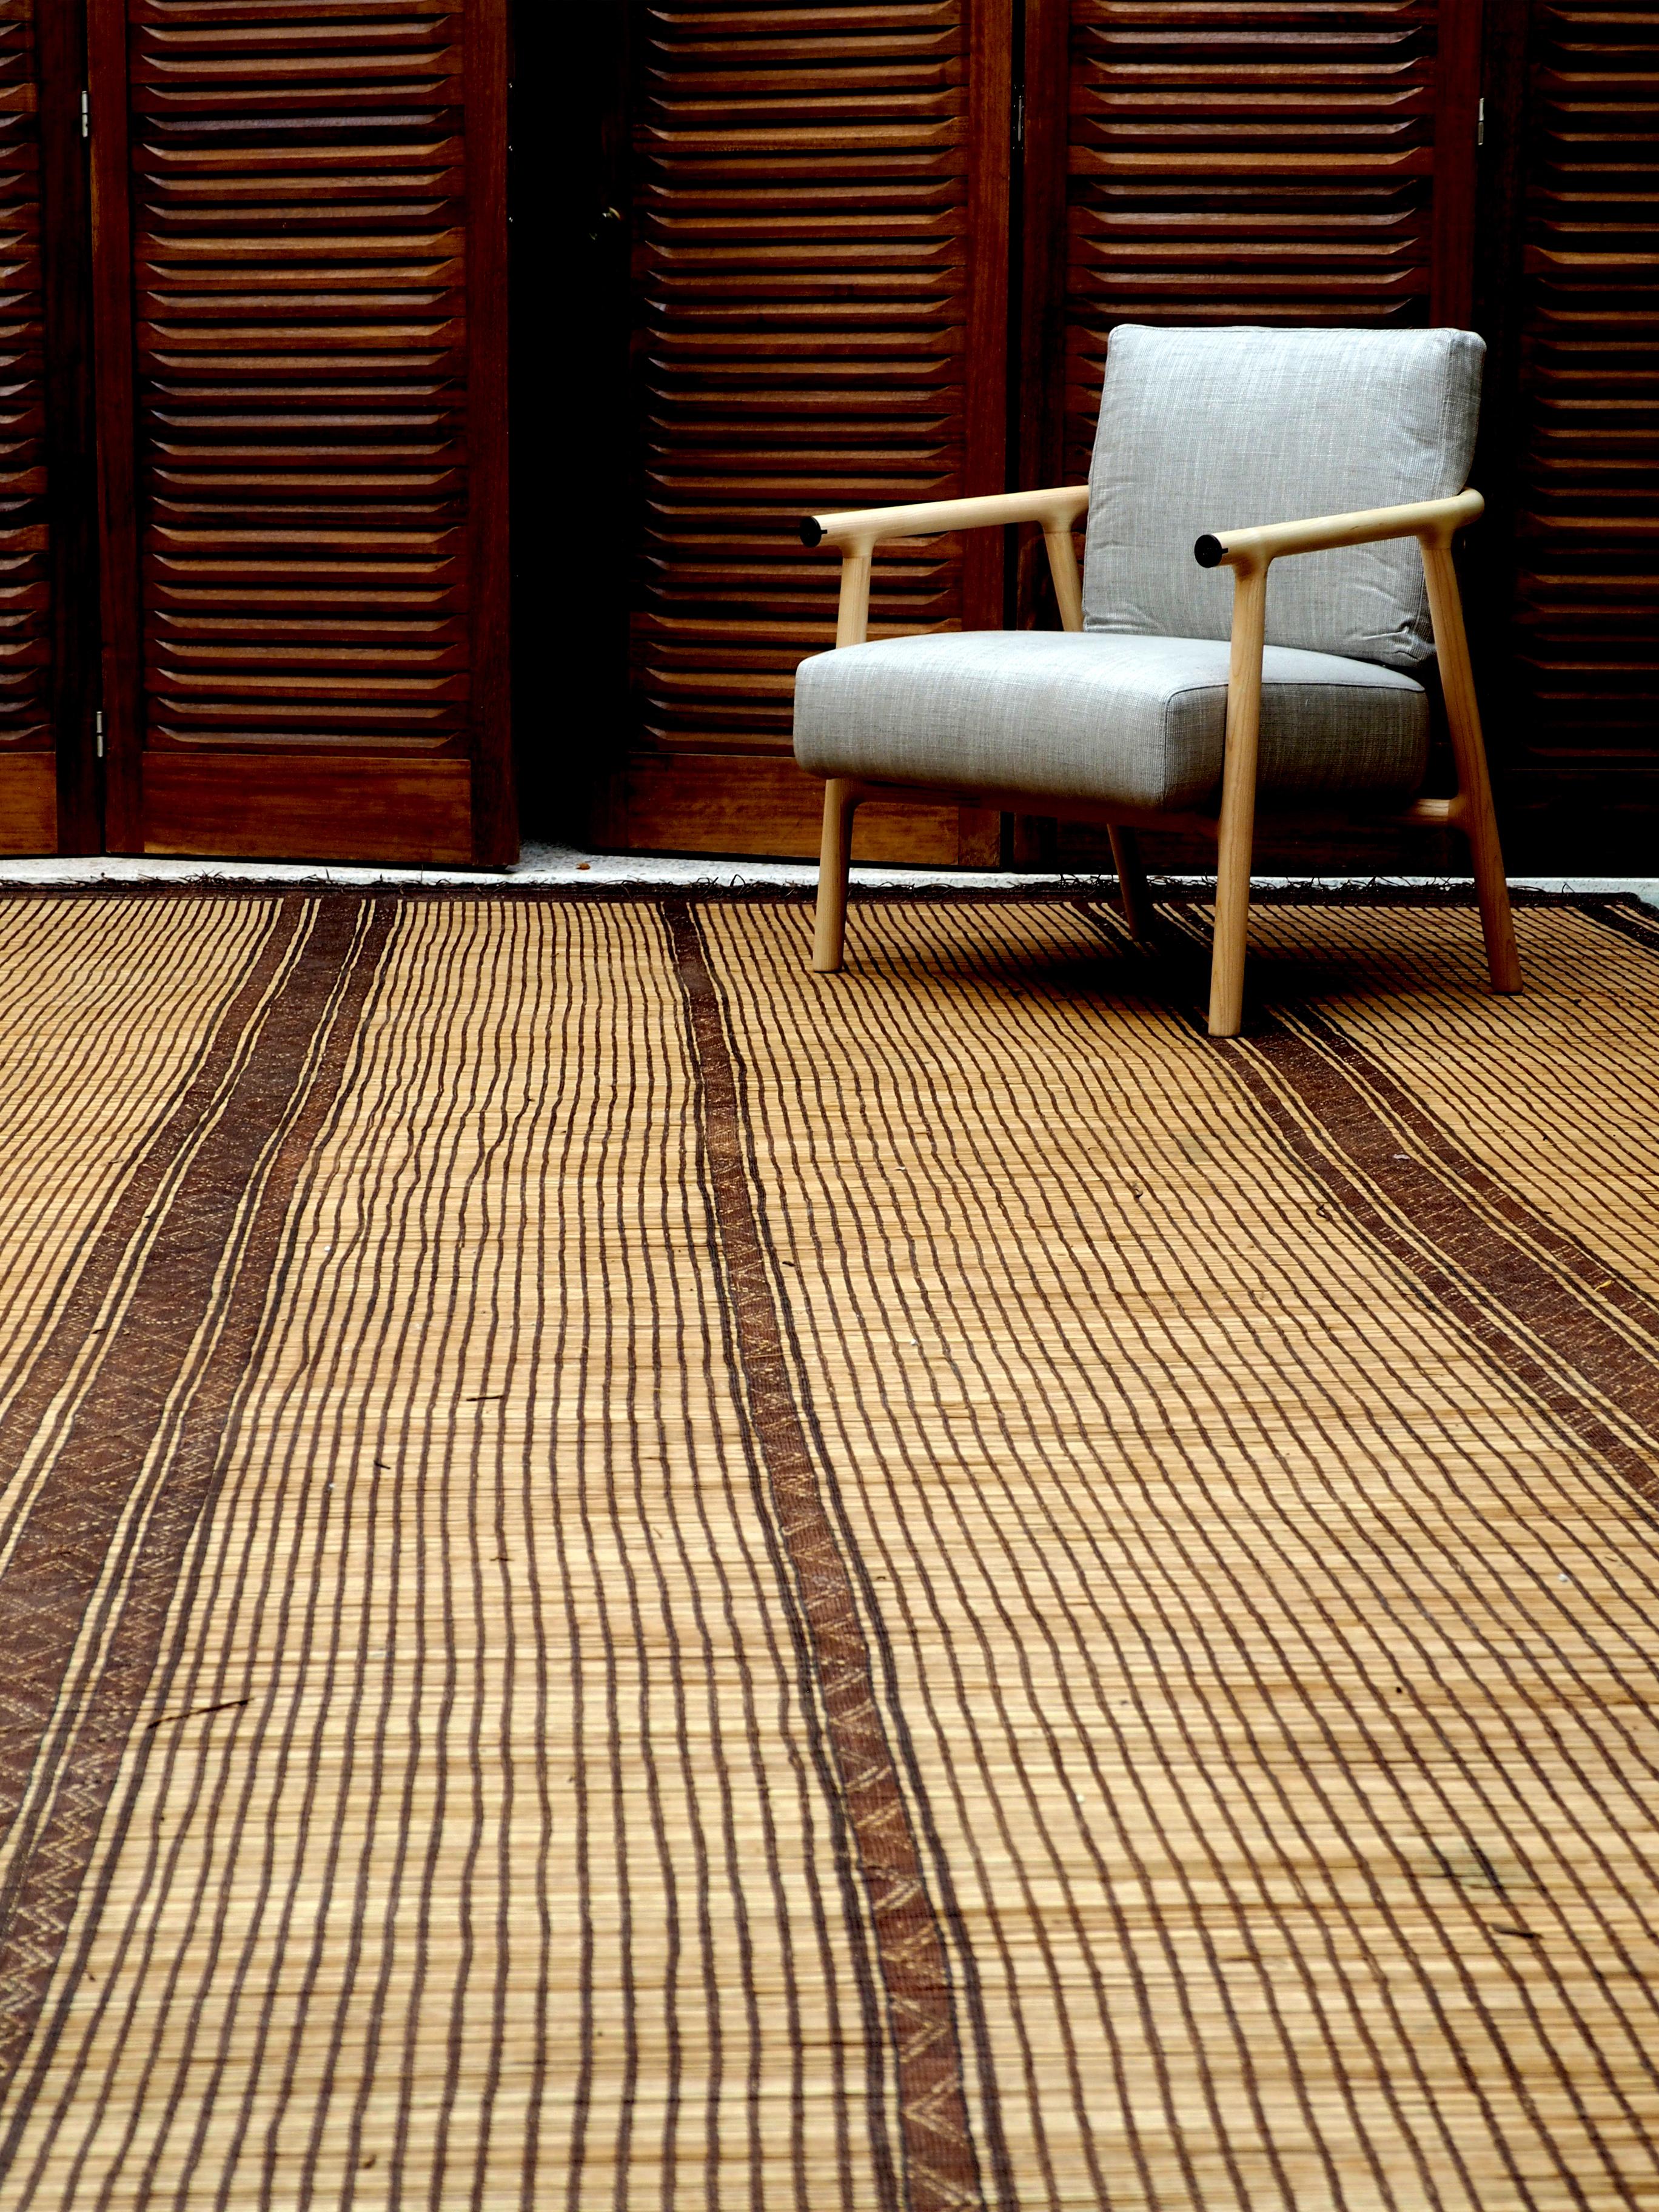 Mauritania Mat from Sahara in Leather and Palm Wood, Mid-Century Modern Design In Good Condition For Sale In Reggio Emilia, IT